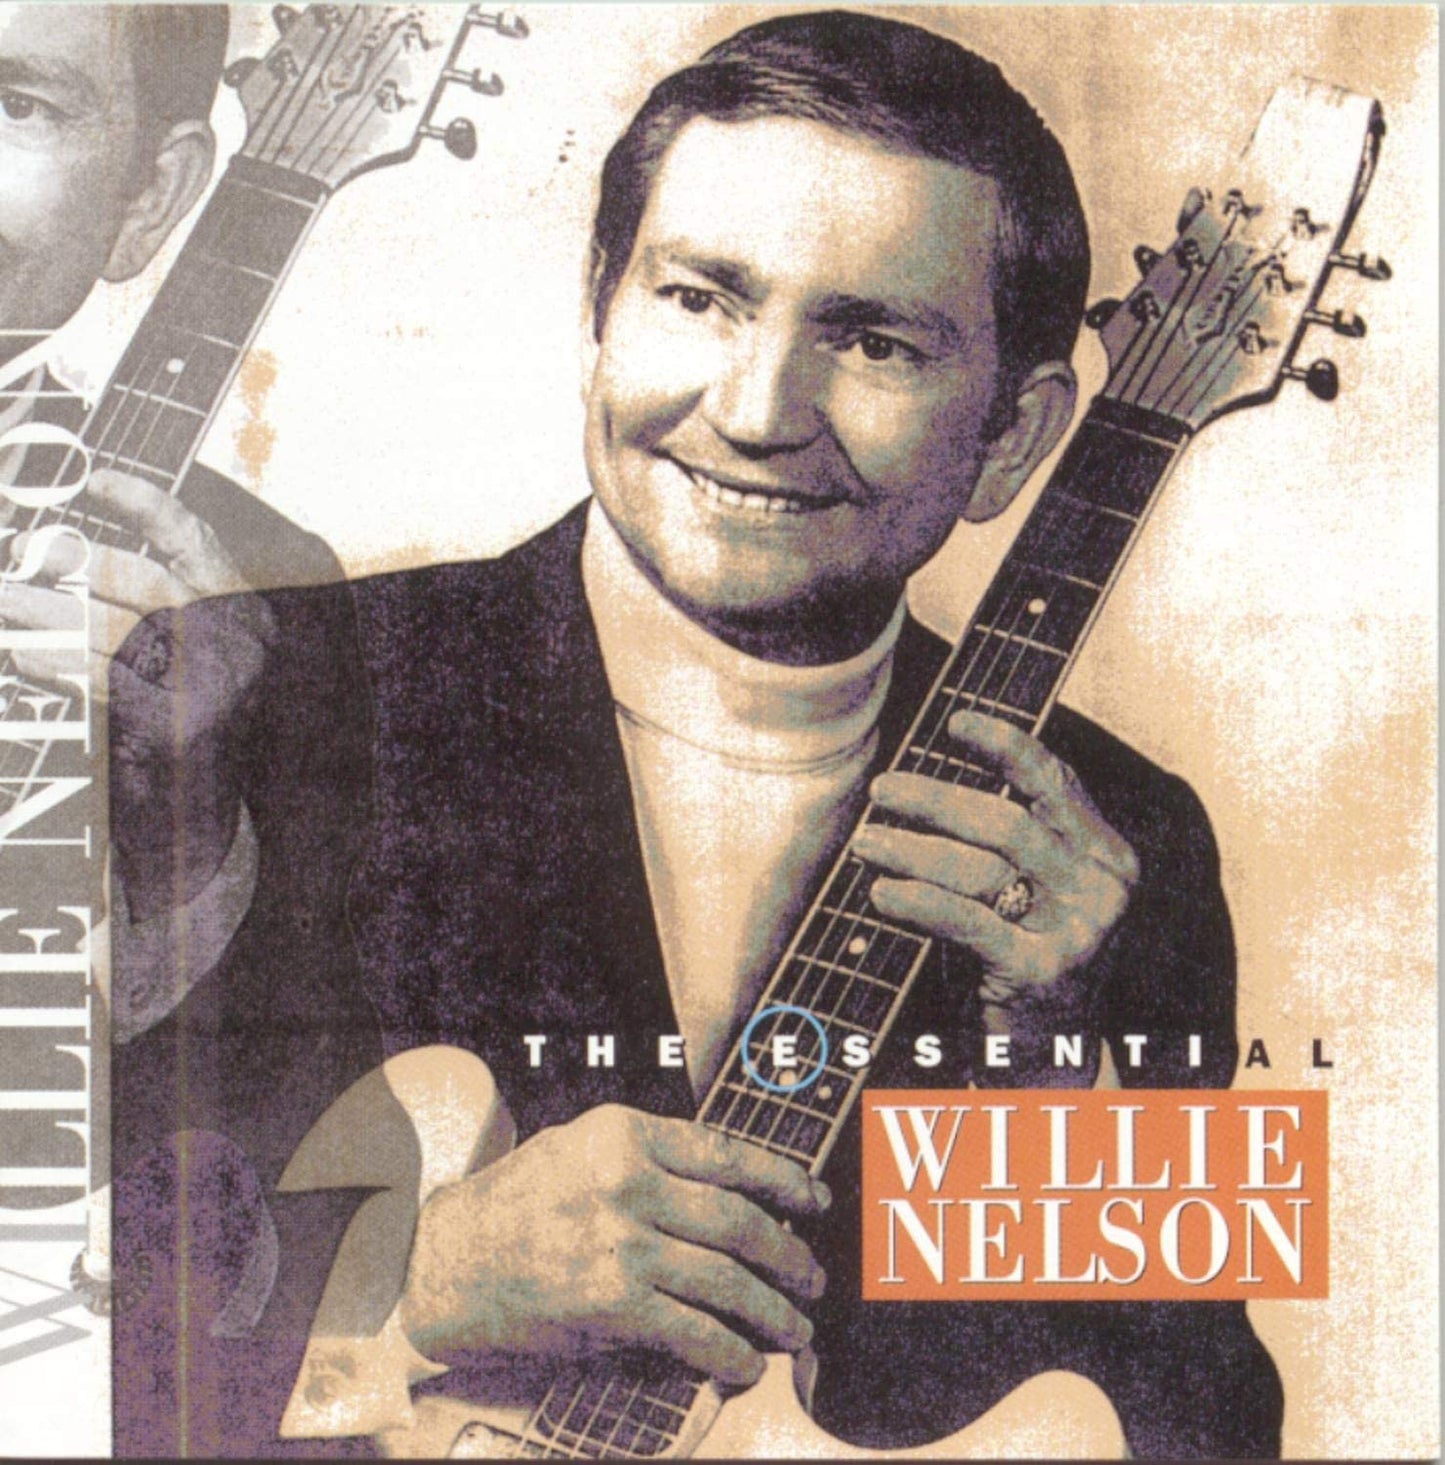 Willie Nelson – The Essential Willie Nelson - USED CD